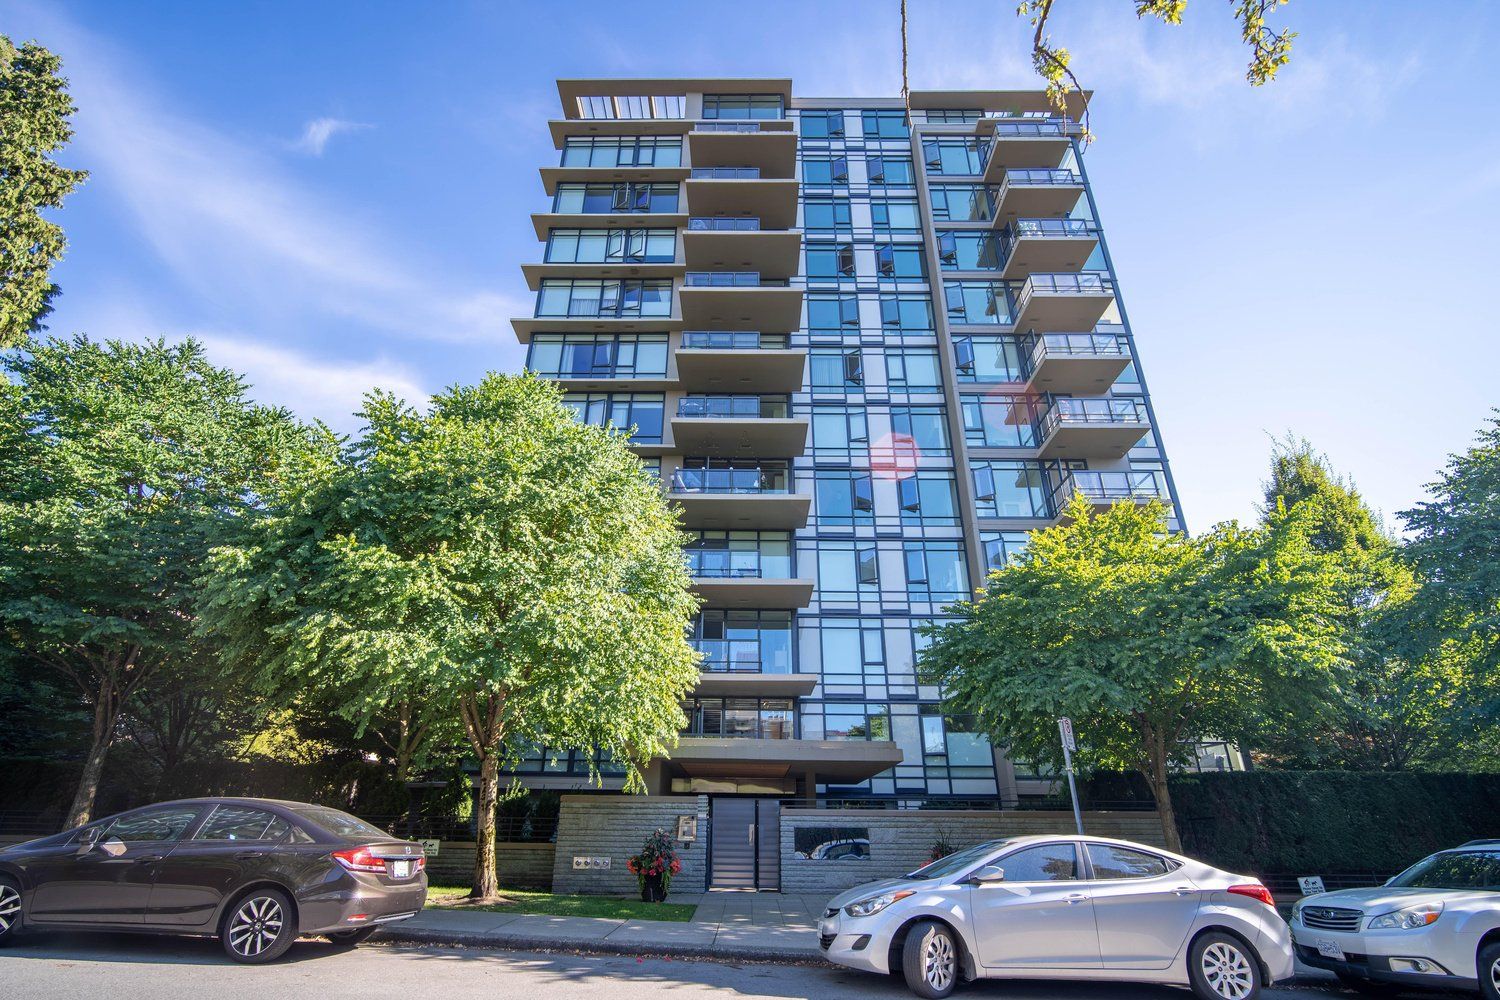 Main Photo: 1101 1468 W 14TH Avenue in Vancouver: Fairview VW Condo for sale (Vancouver West)  : MLS®# R2608942